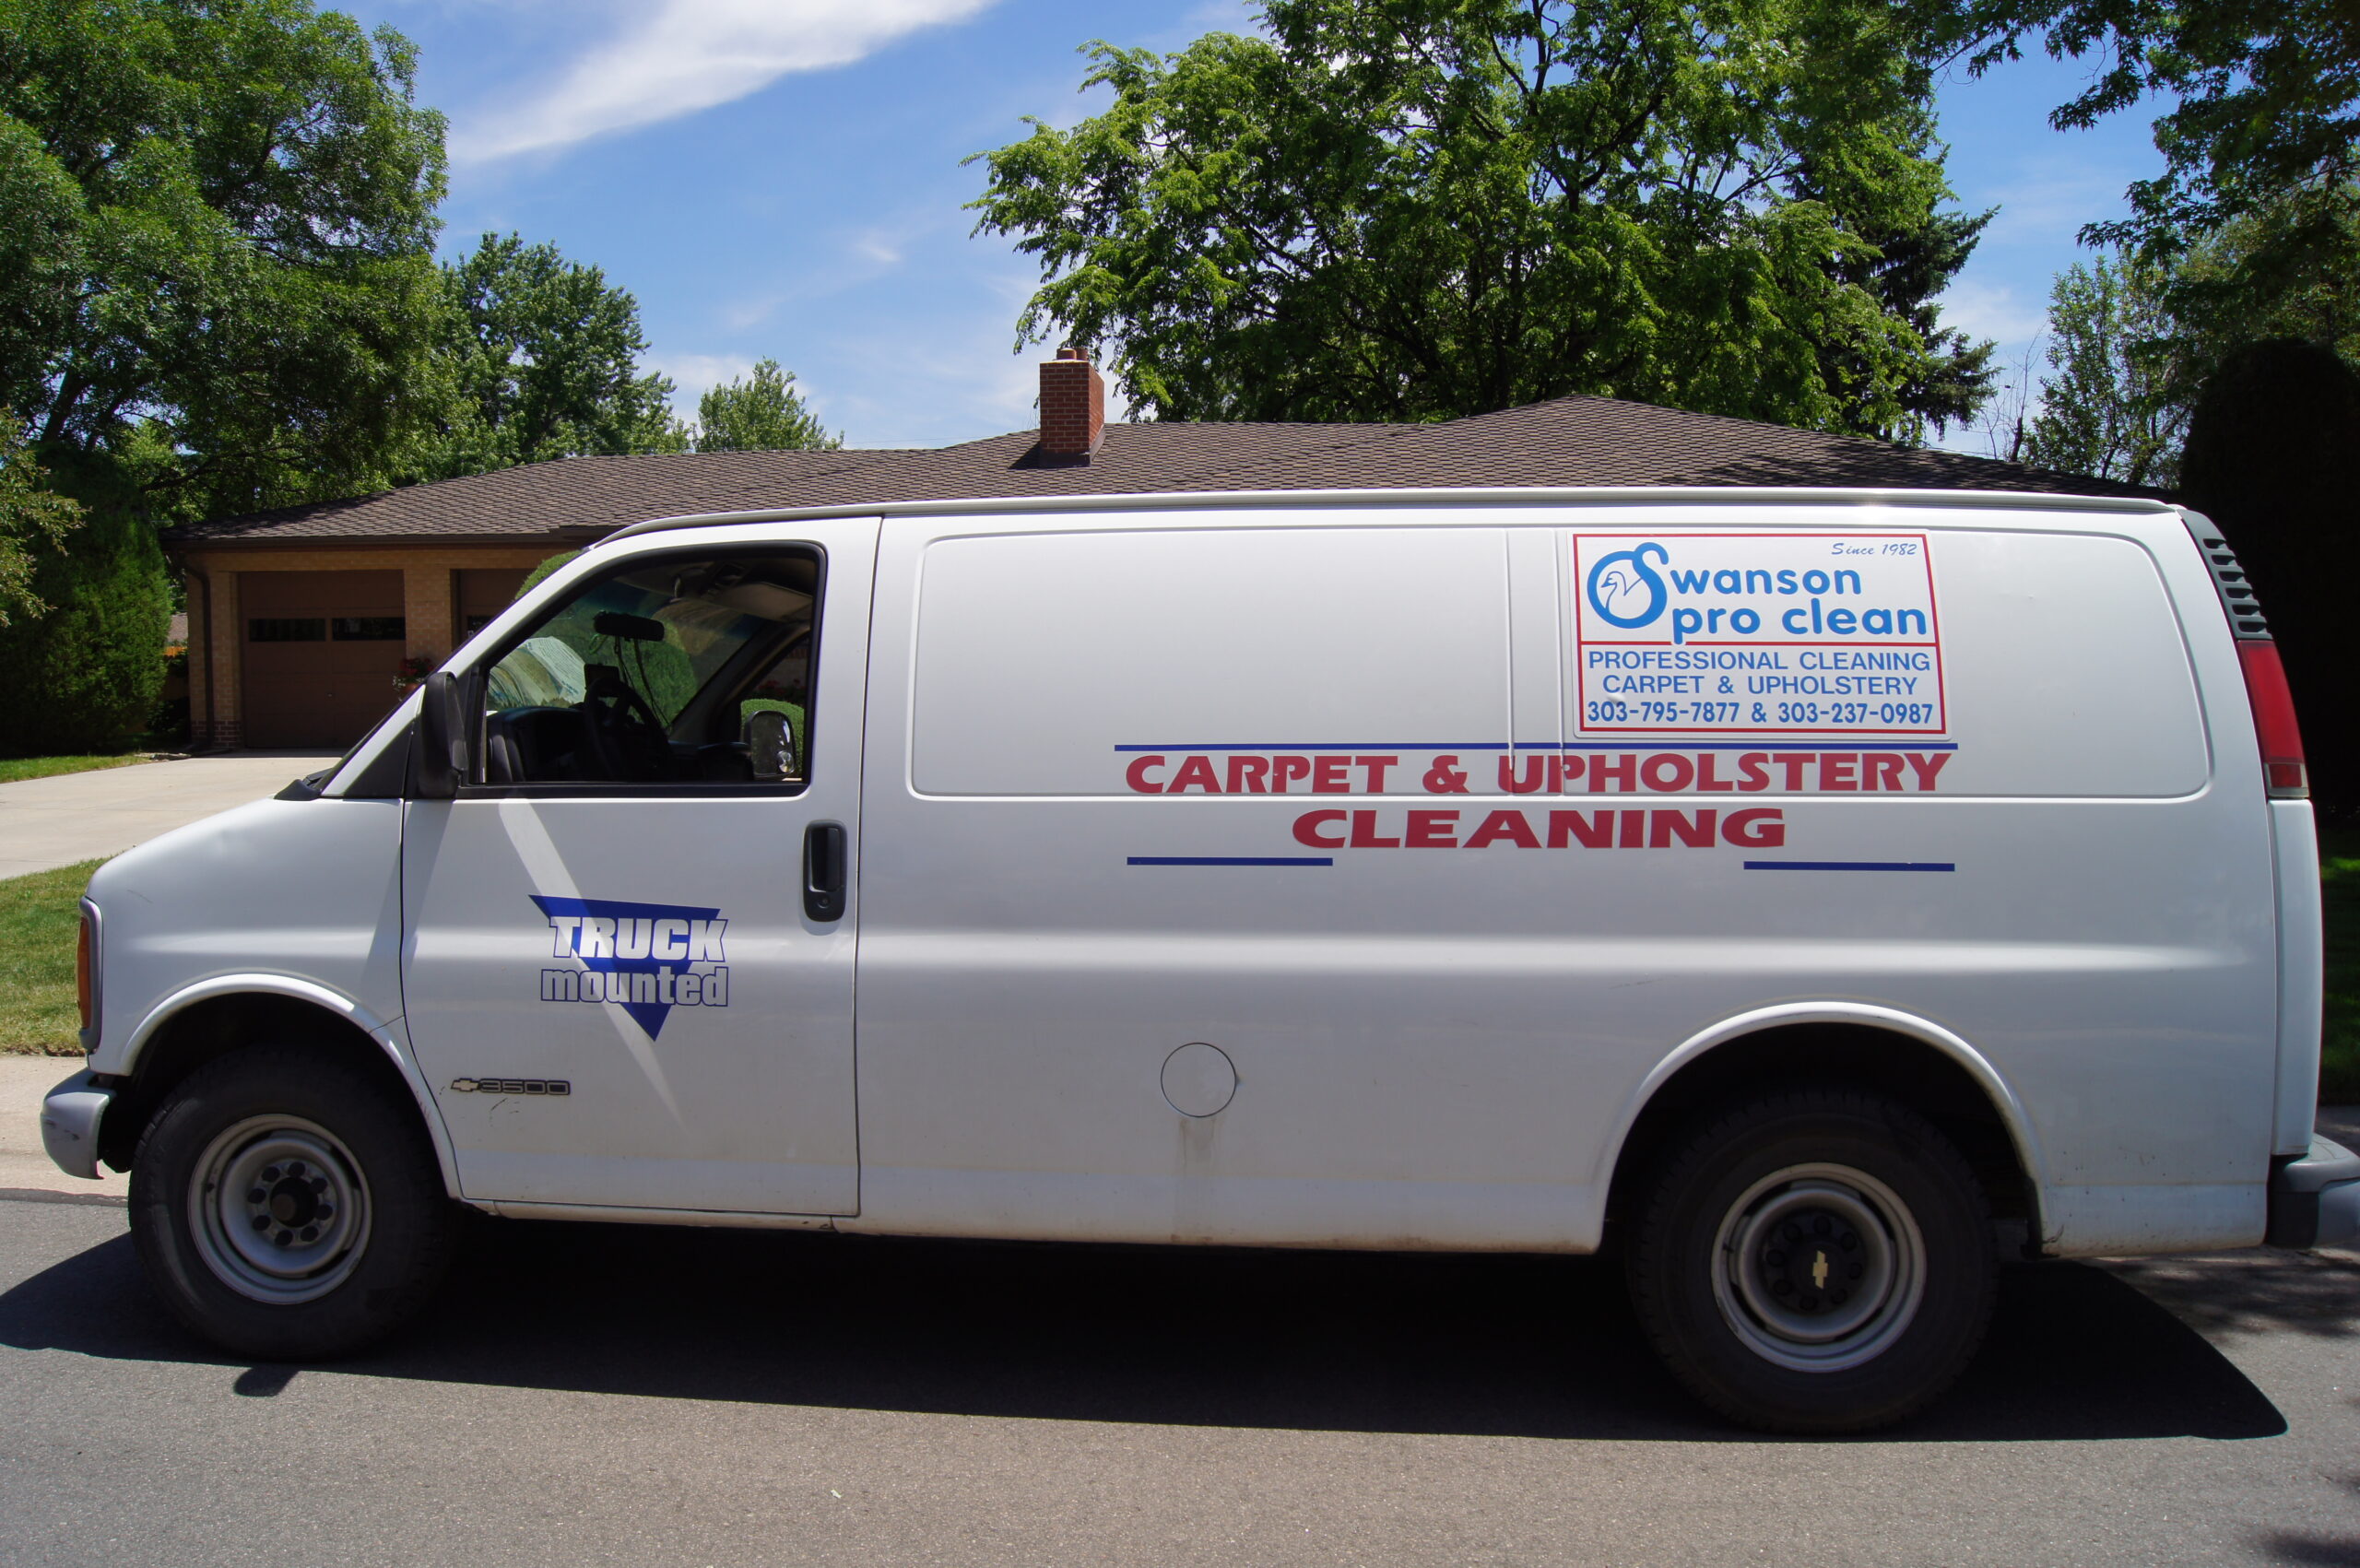 A Truck Mounted Swanson Pro clean Van. Phone: 303-237-0987 magnetic sign with vinyl decals.